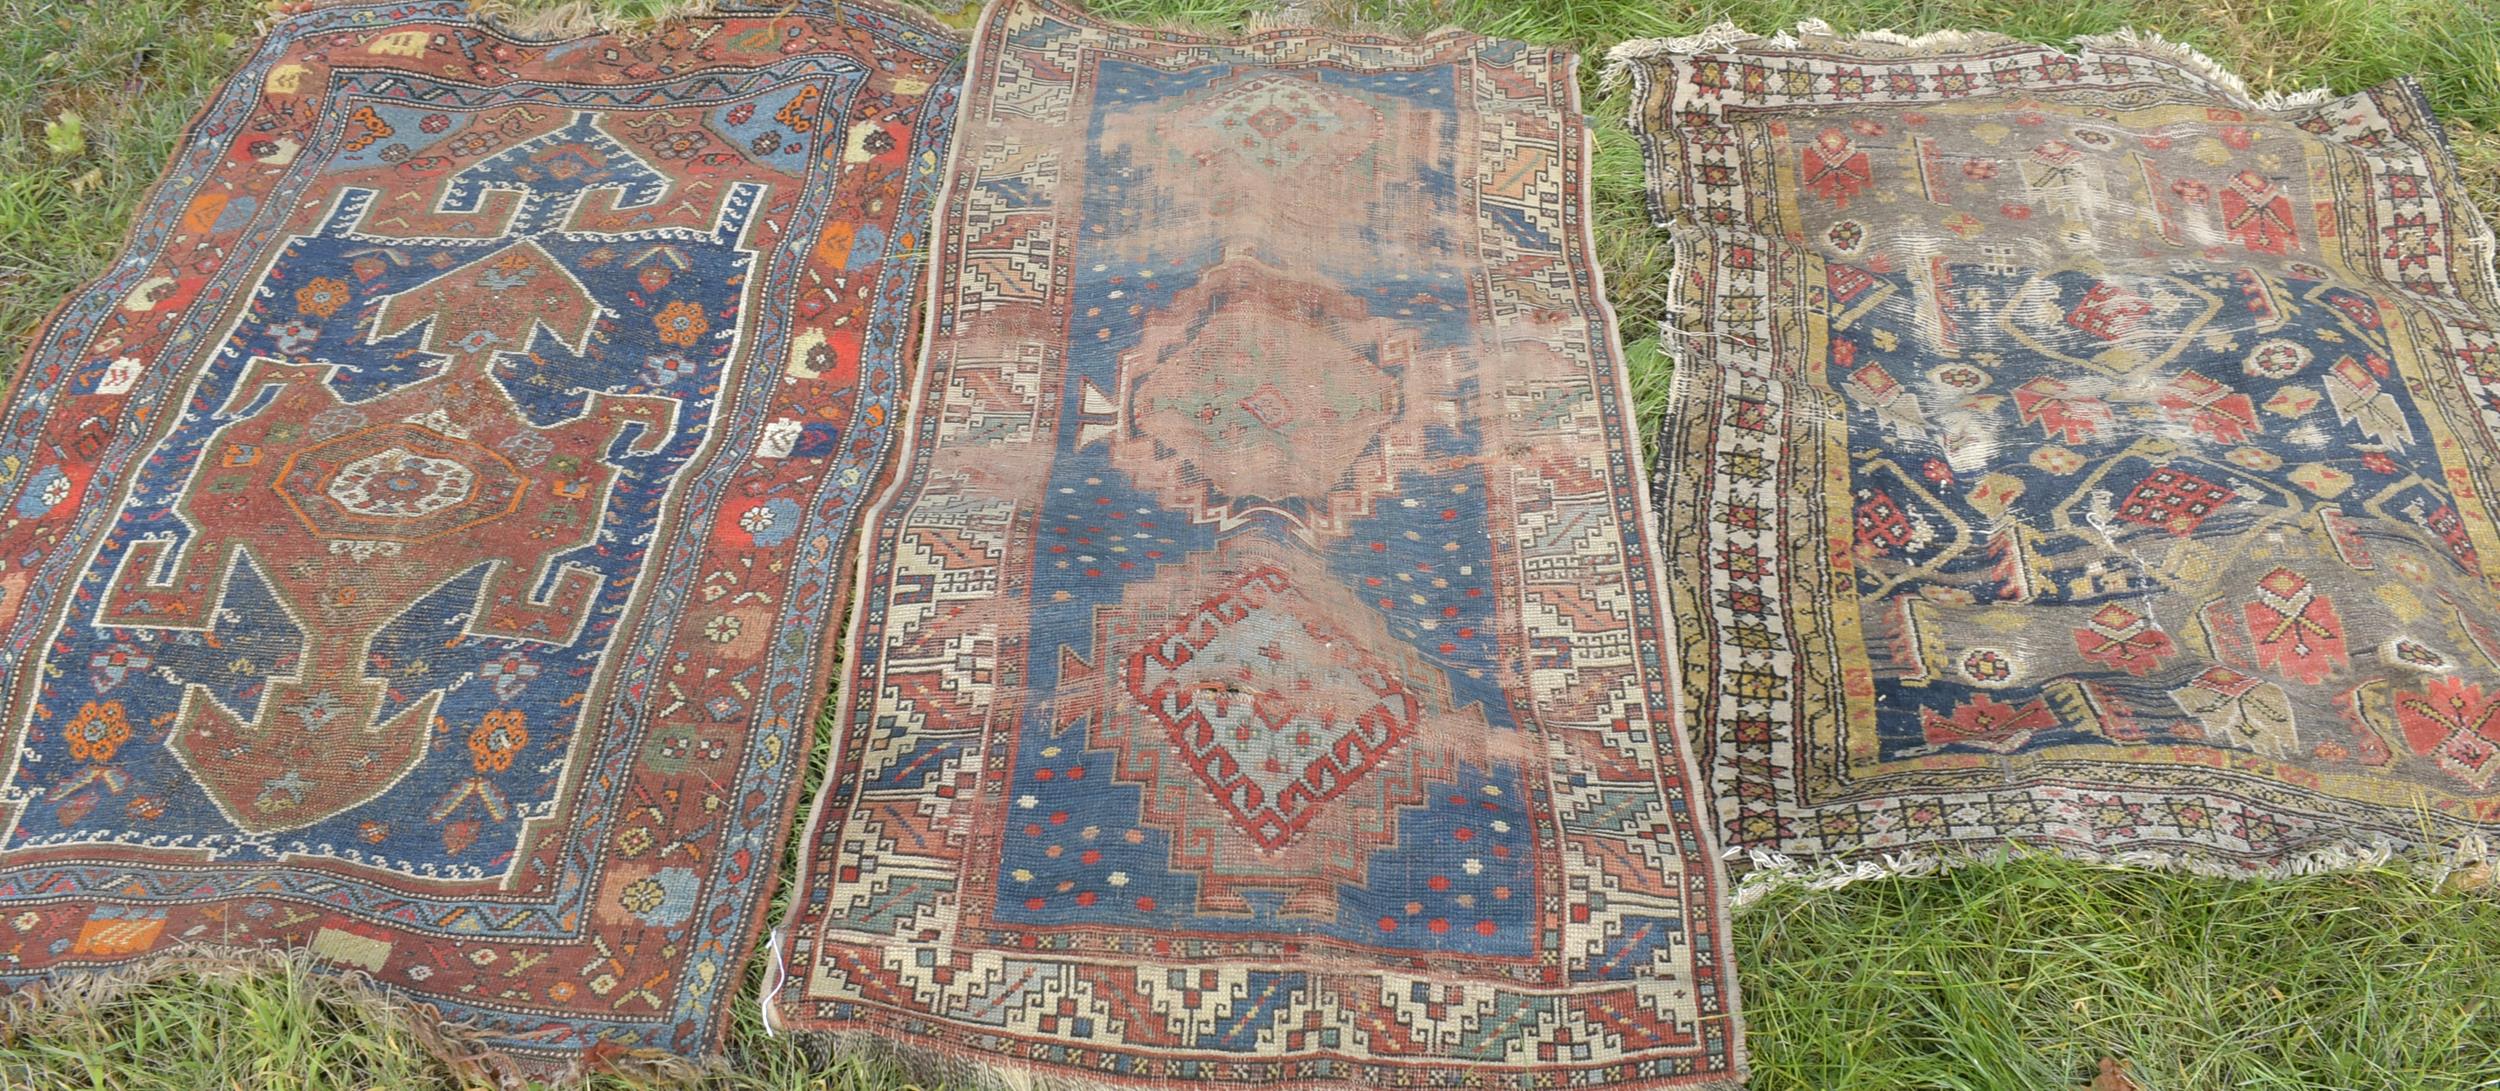 THREE ANTIQUE WORN SCATTER RUGS  29e26d